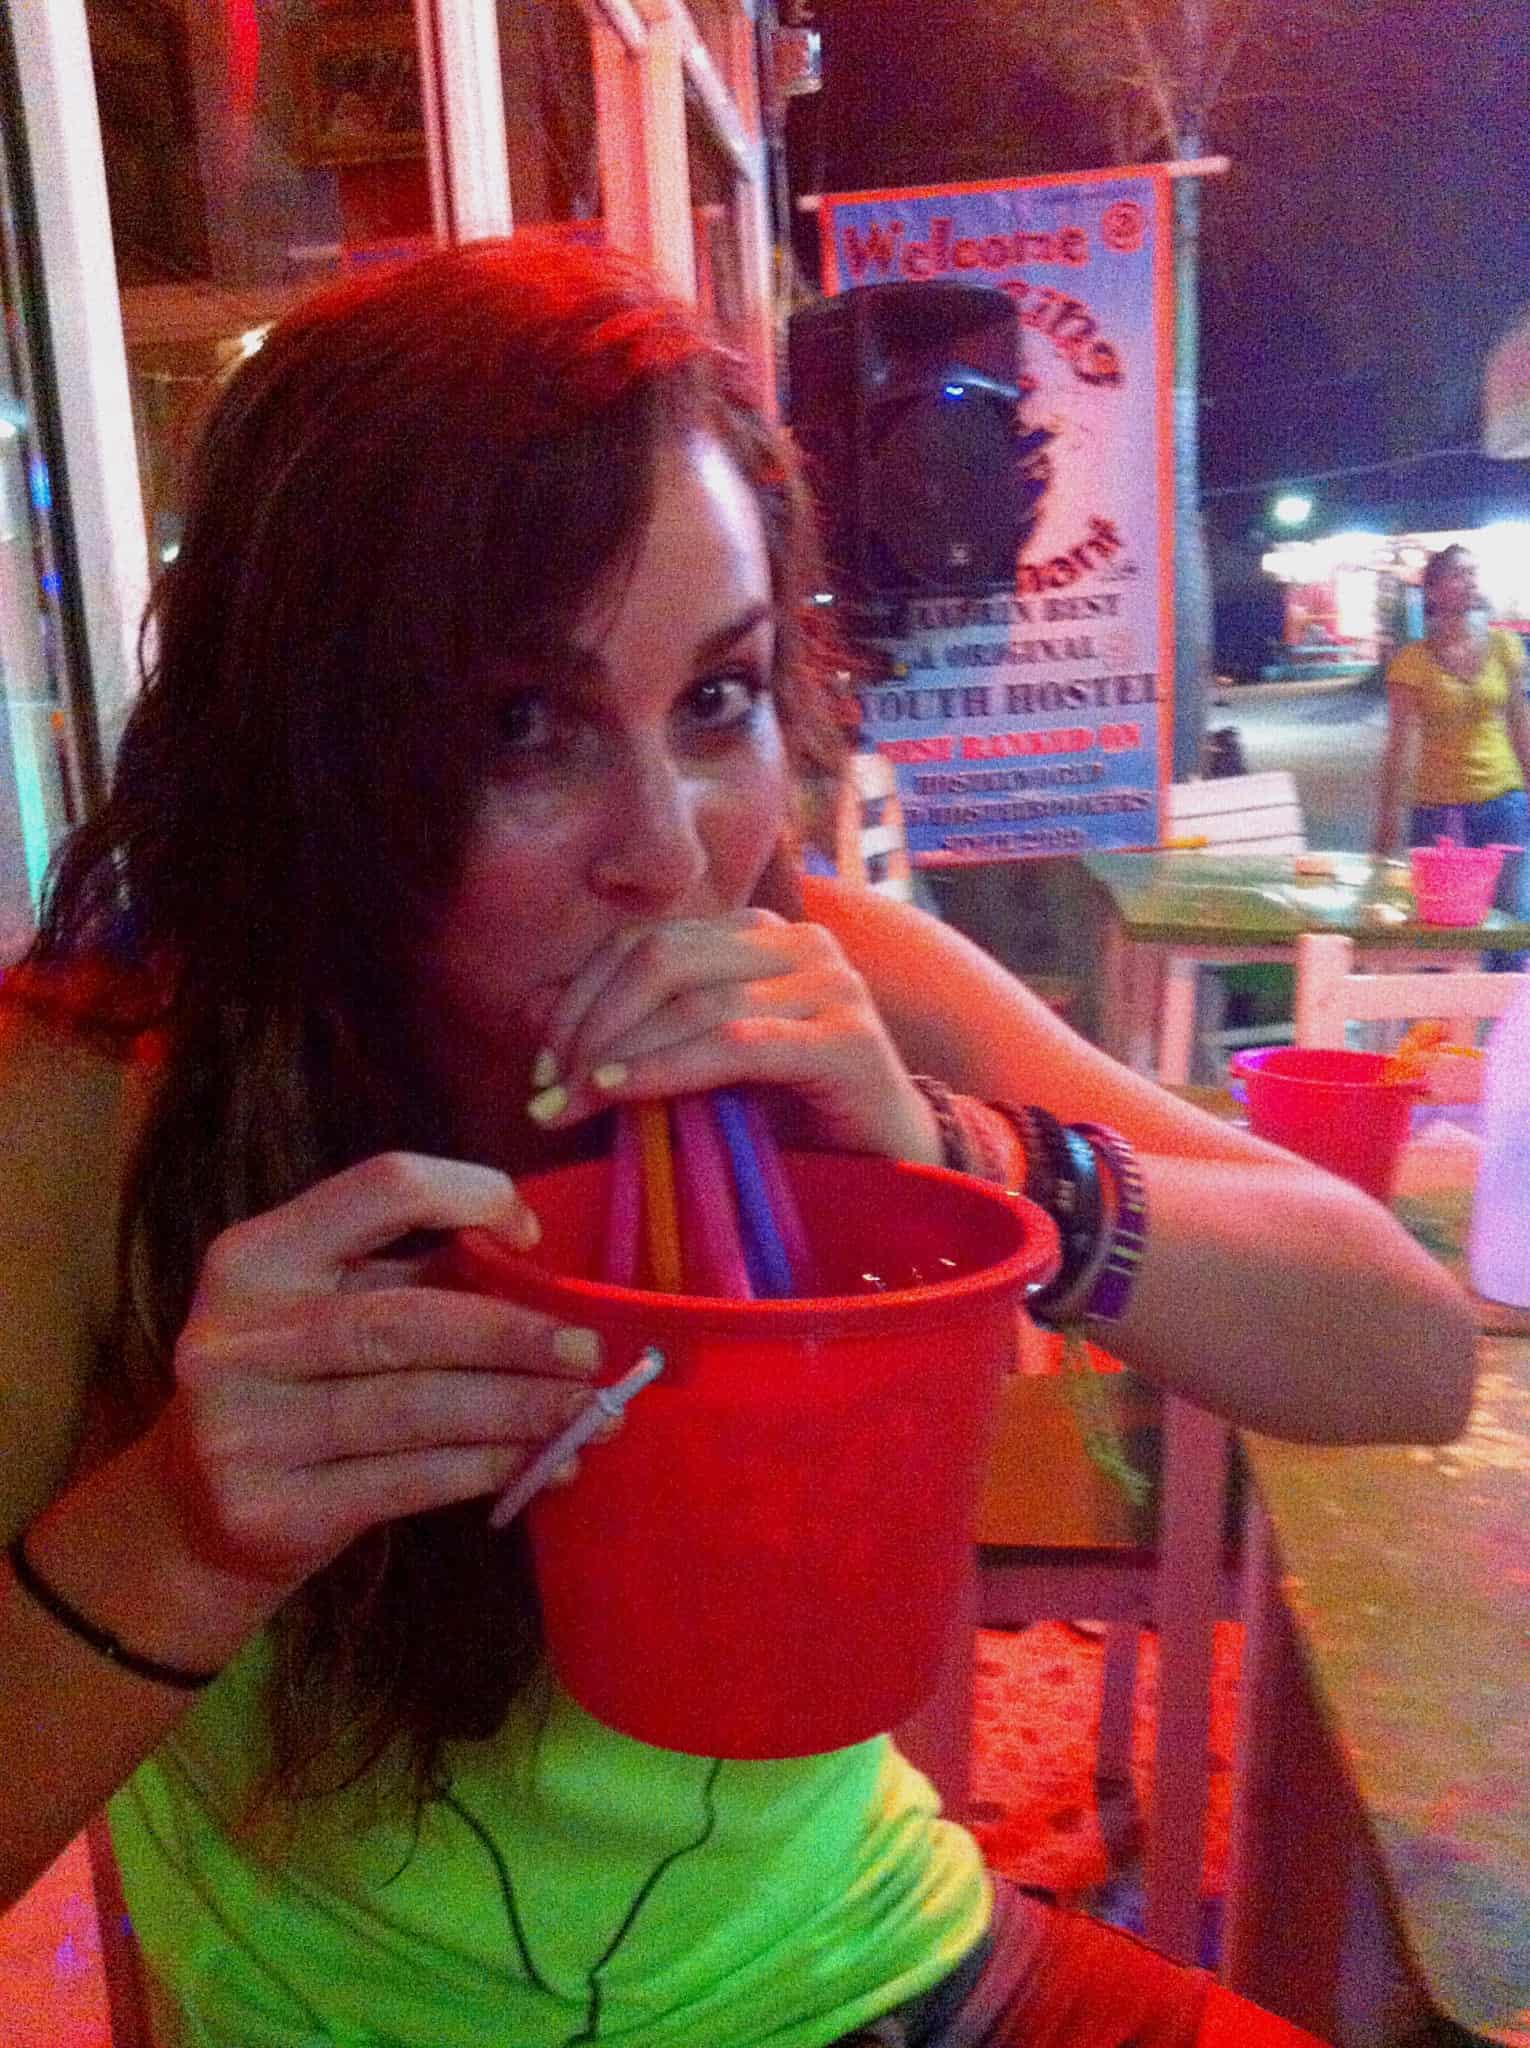 Beginners Guide + Tips for the Full Moon Party, Thailand Migrating Miss